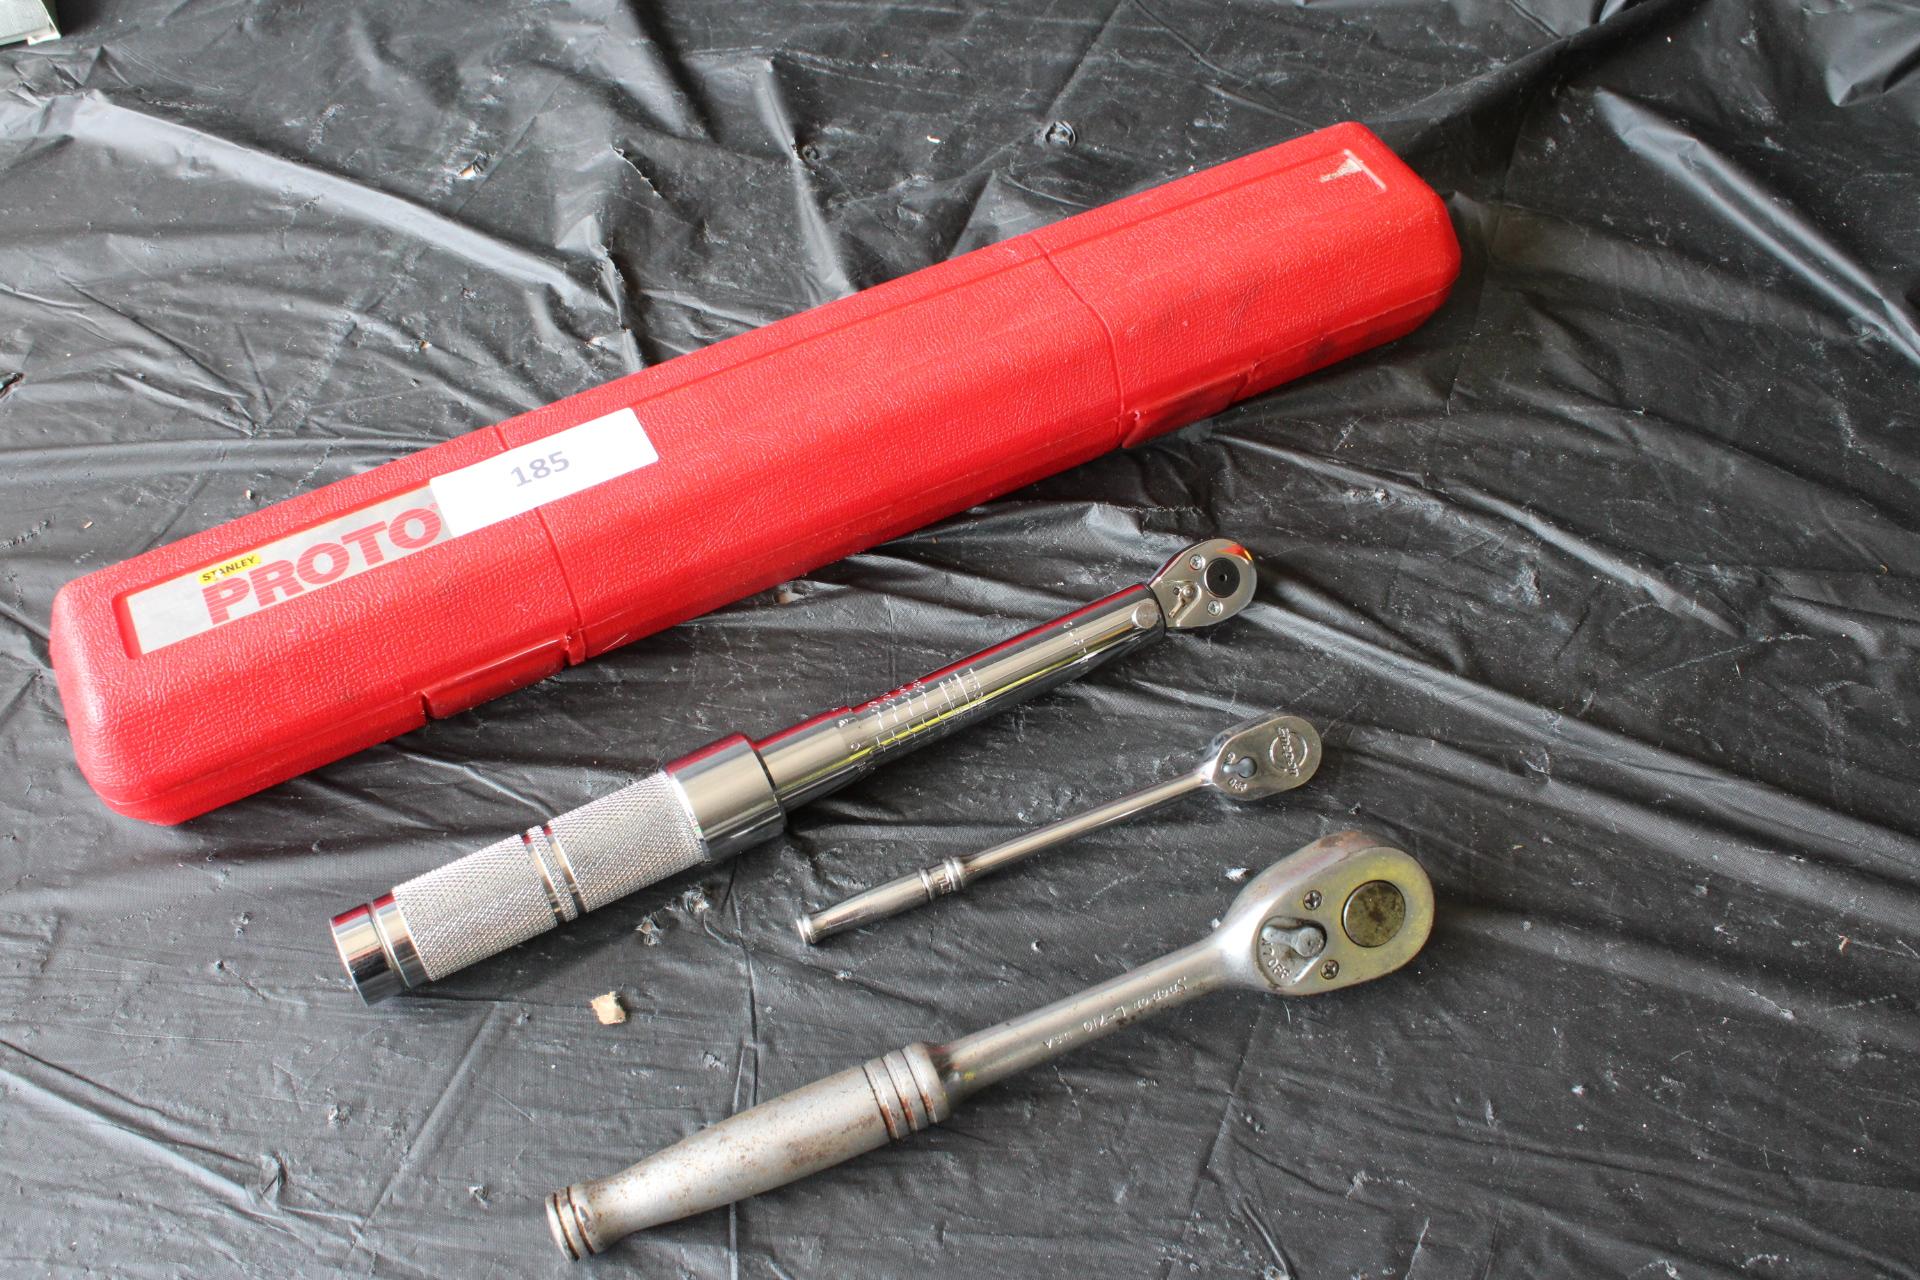 Snap On Ratchets and Proto Torque Wrench